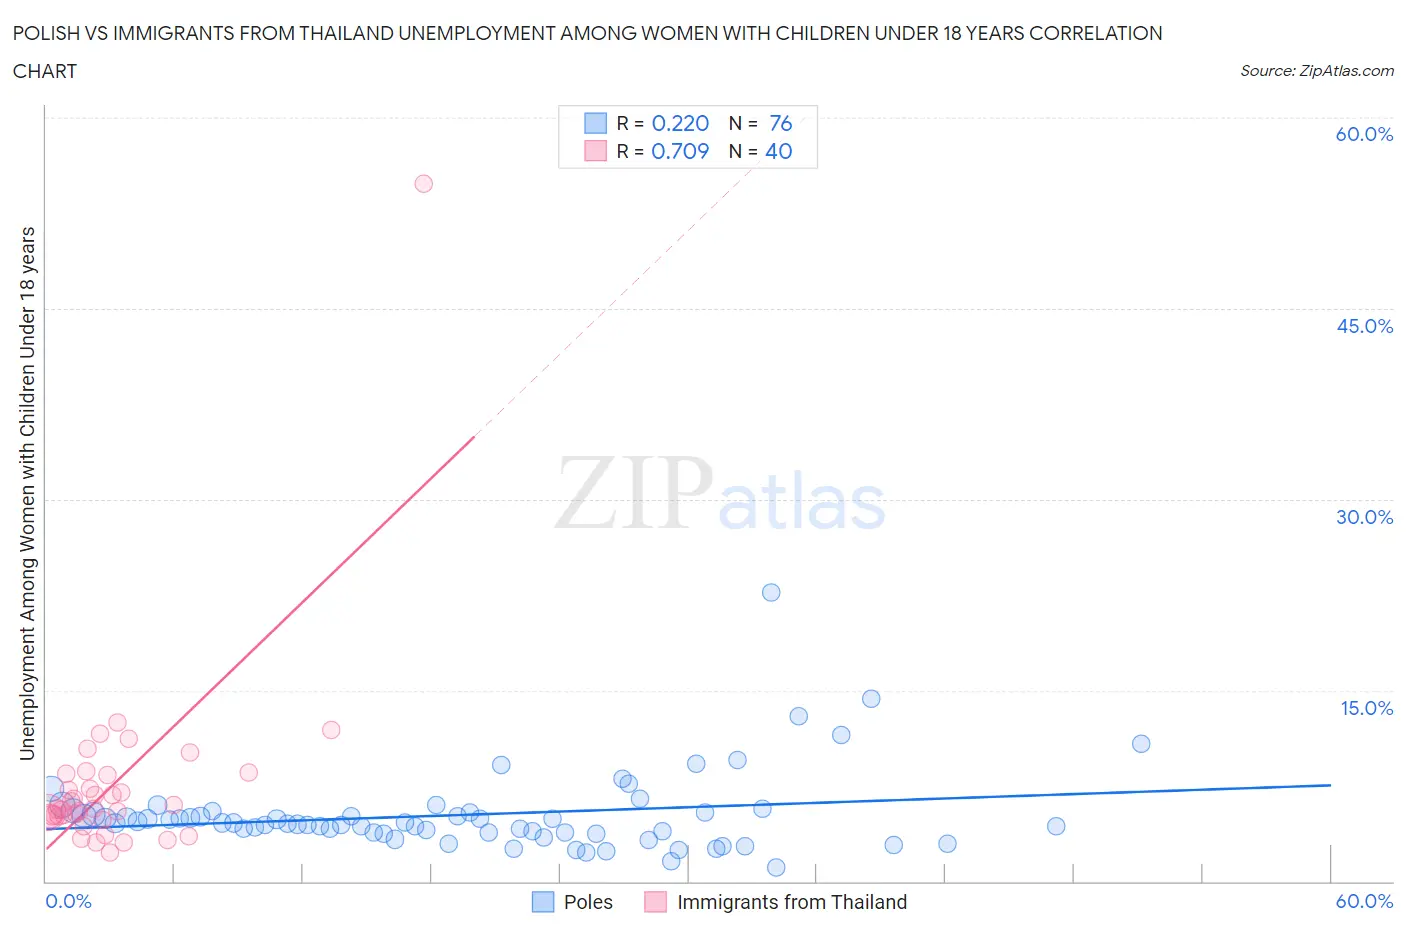 Polish vs Immigrants from Thailand Unemployment Among Women with Children Under 18 years